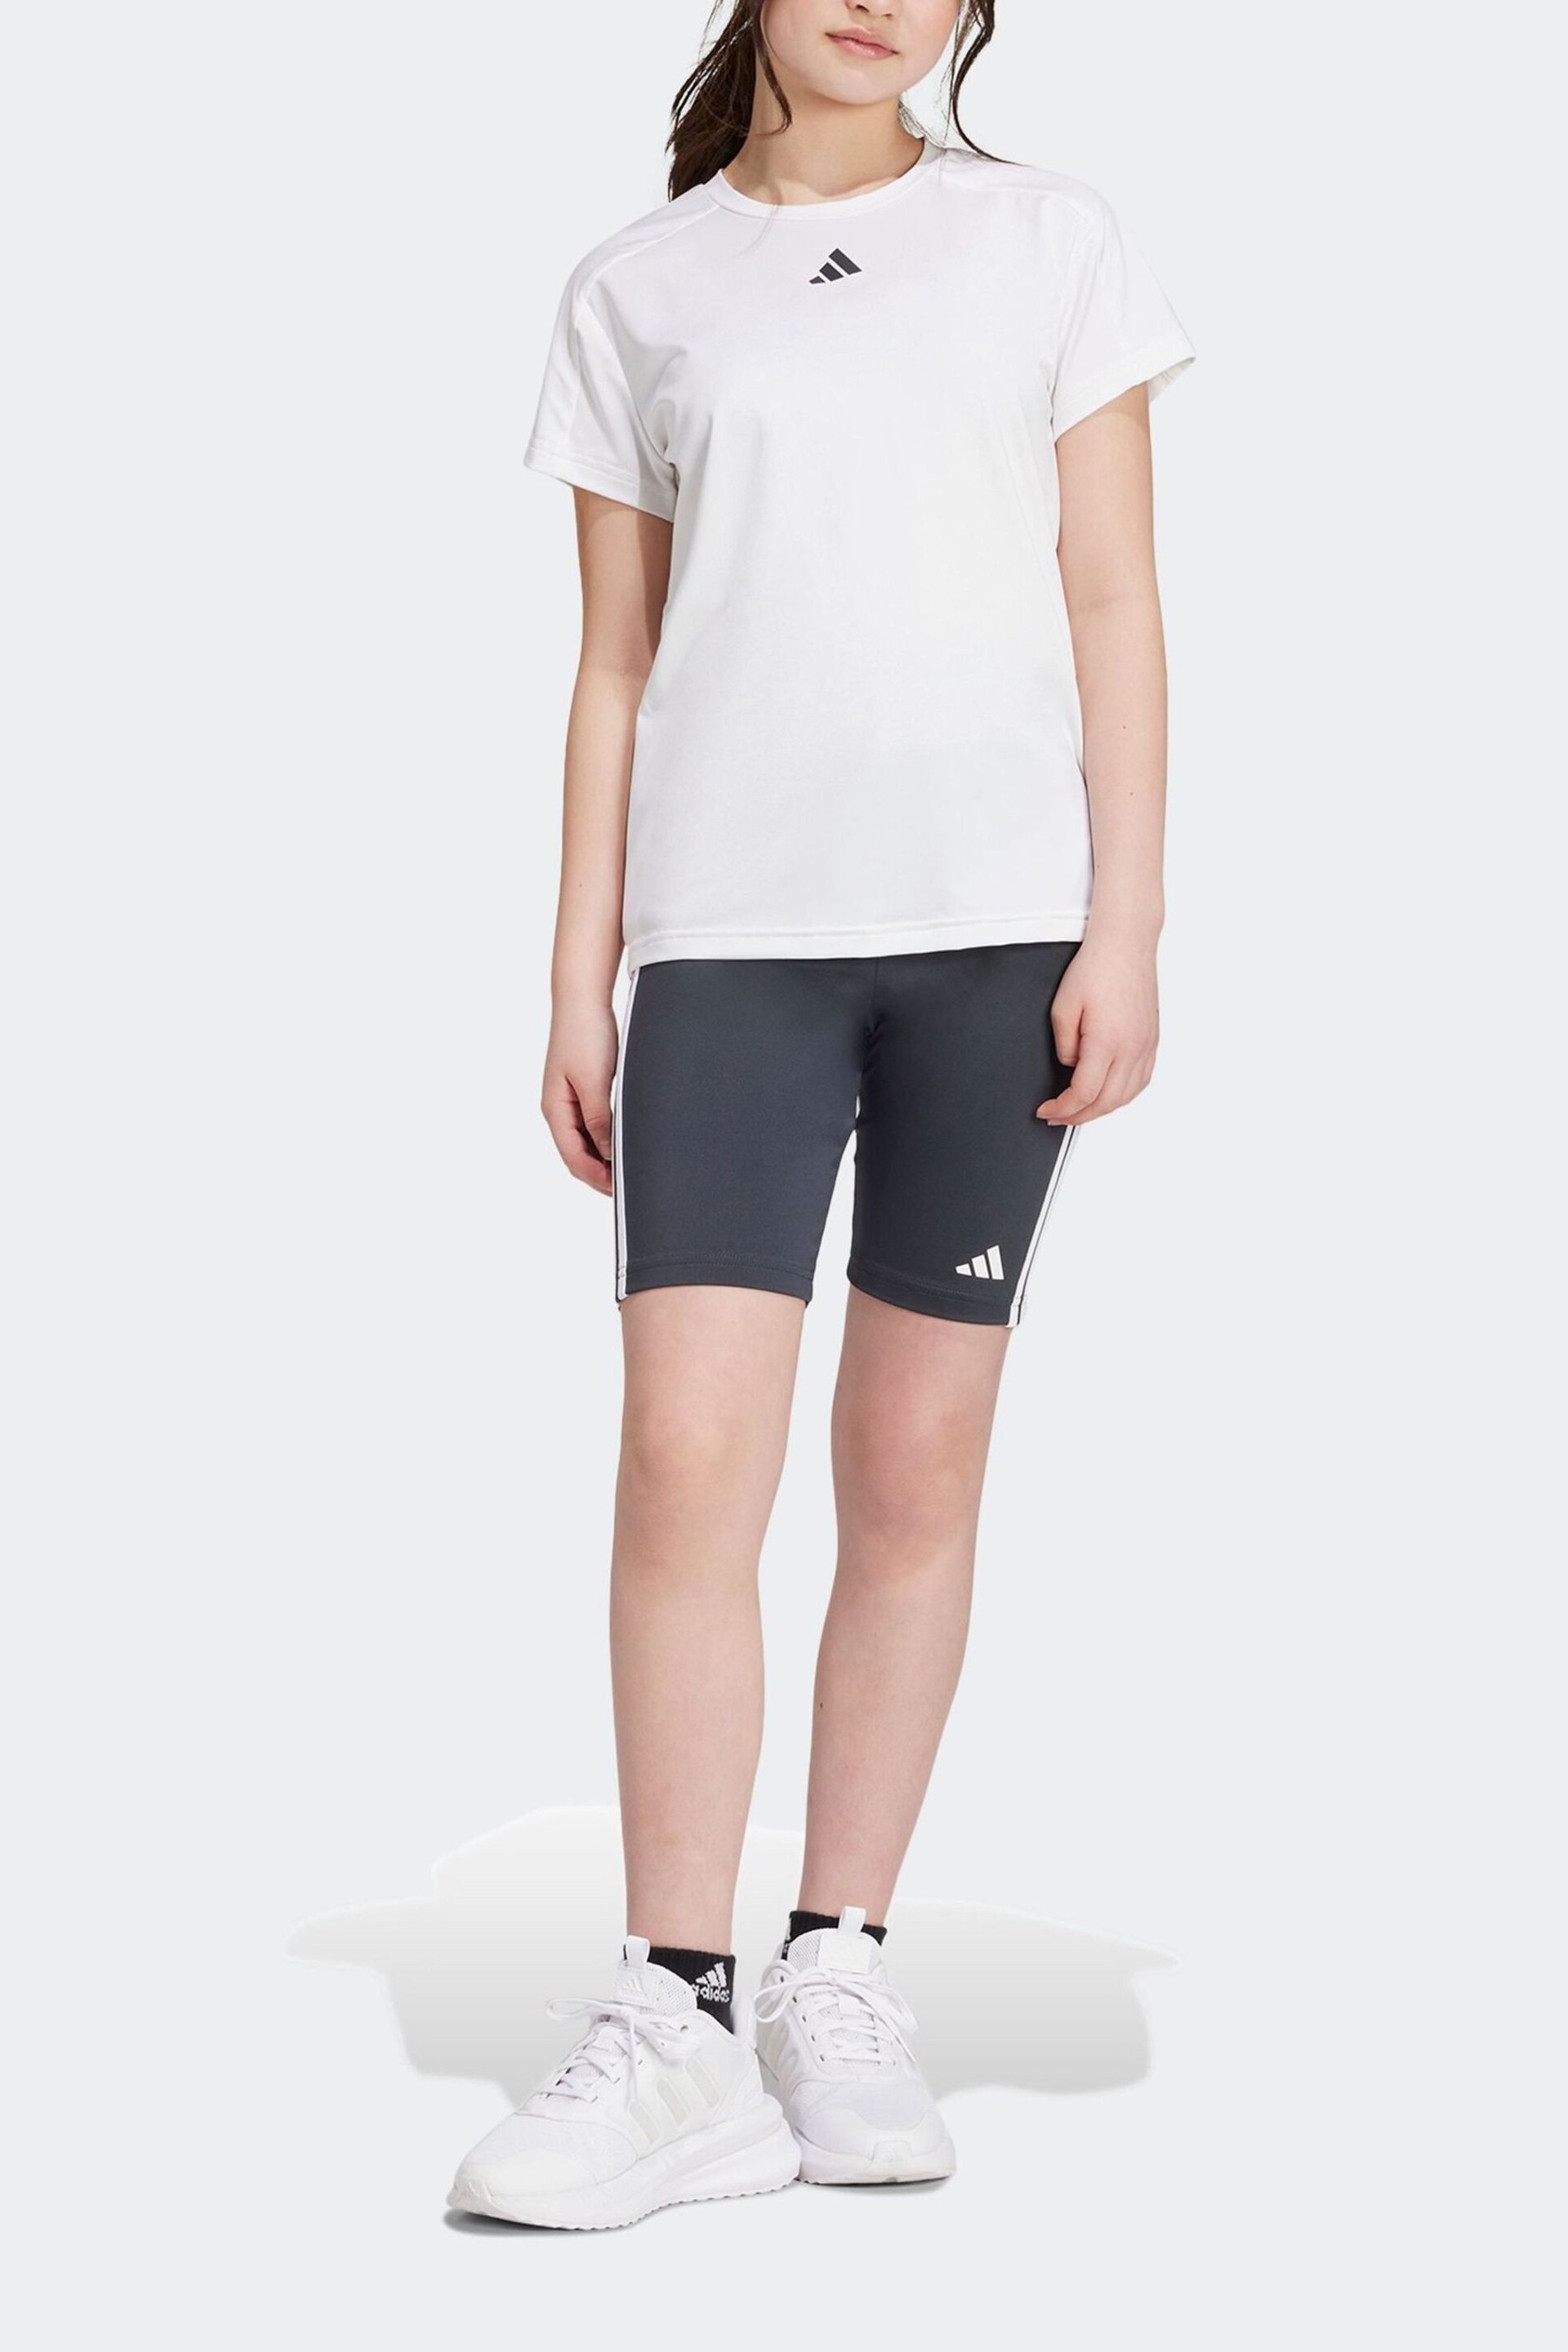 adidas White Kids Train Essentials T-Shirt and Shorts Set - Image 6 of 13